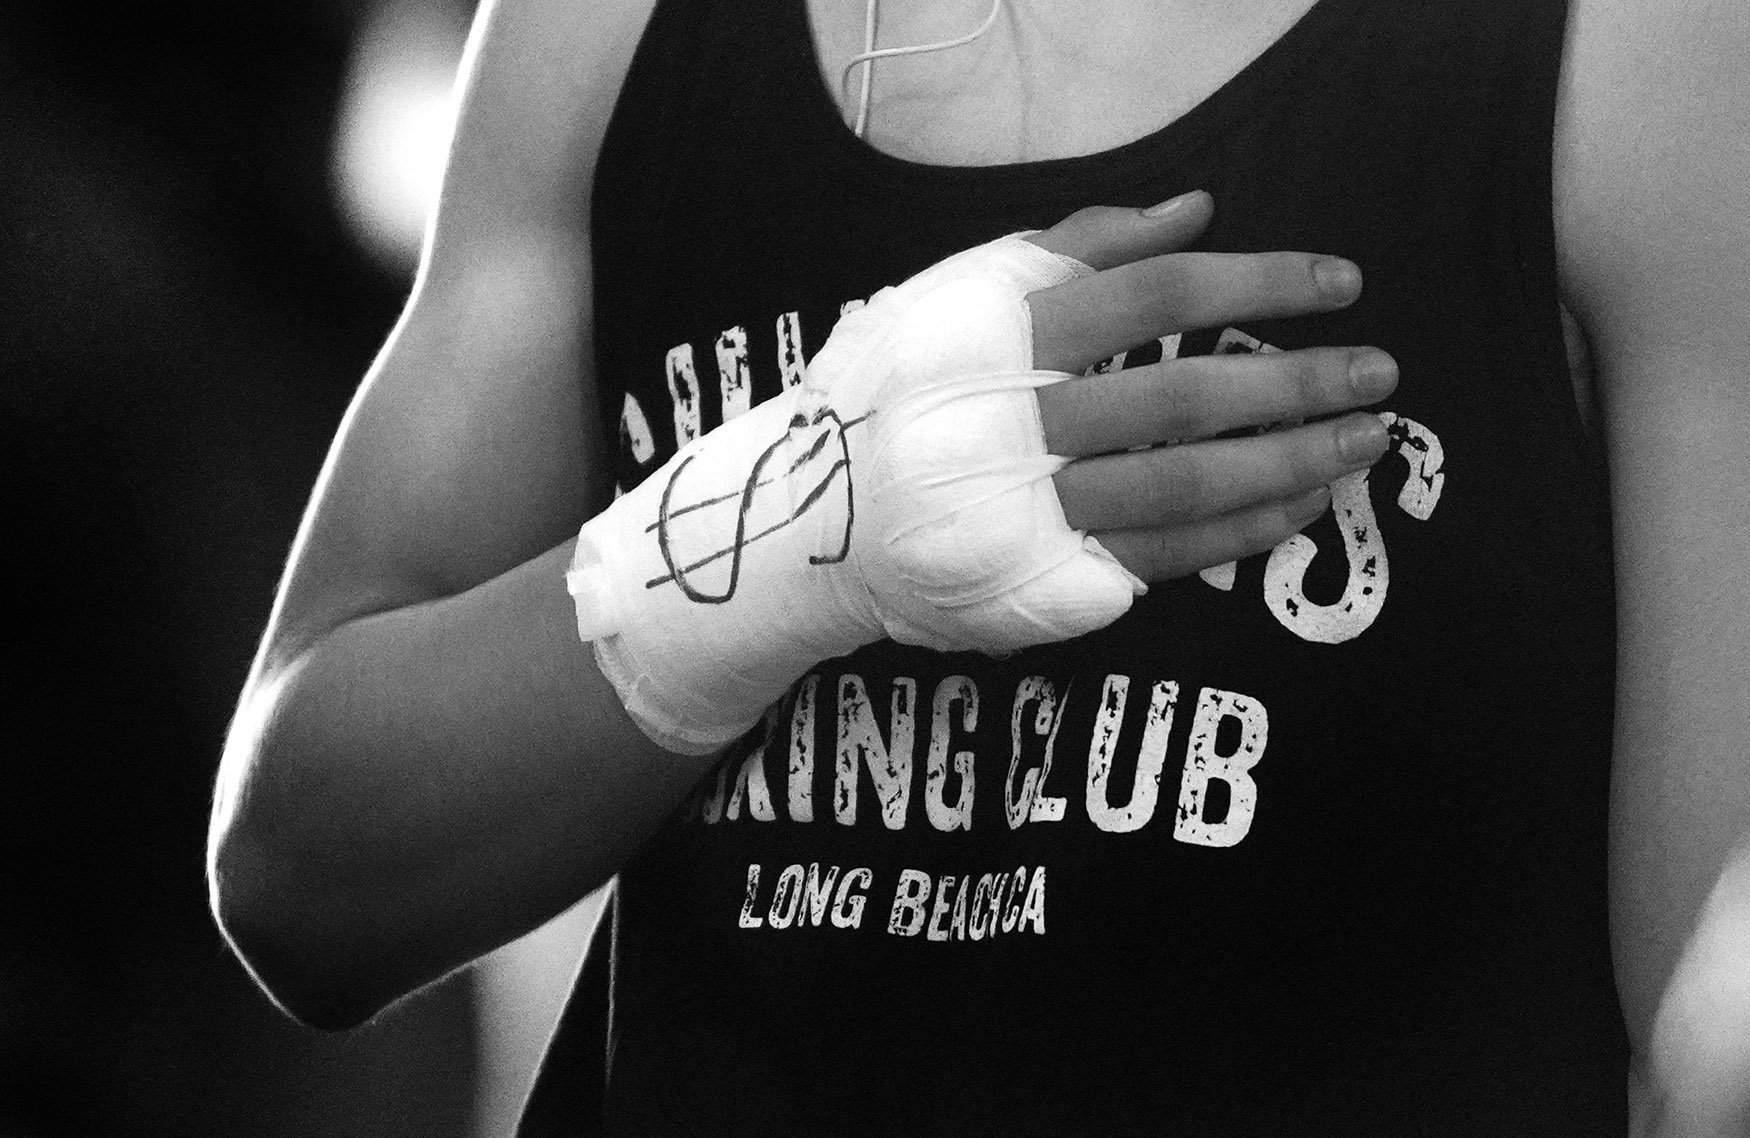  A boxer with the money sign on his tapered hands during the annual amateur boxing show staged by the Duarte Boxing Club at Duarte High School in Duarte on Saturday, August 13, 2022.  